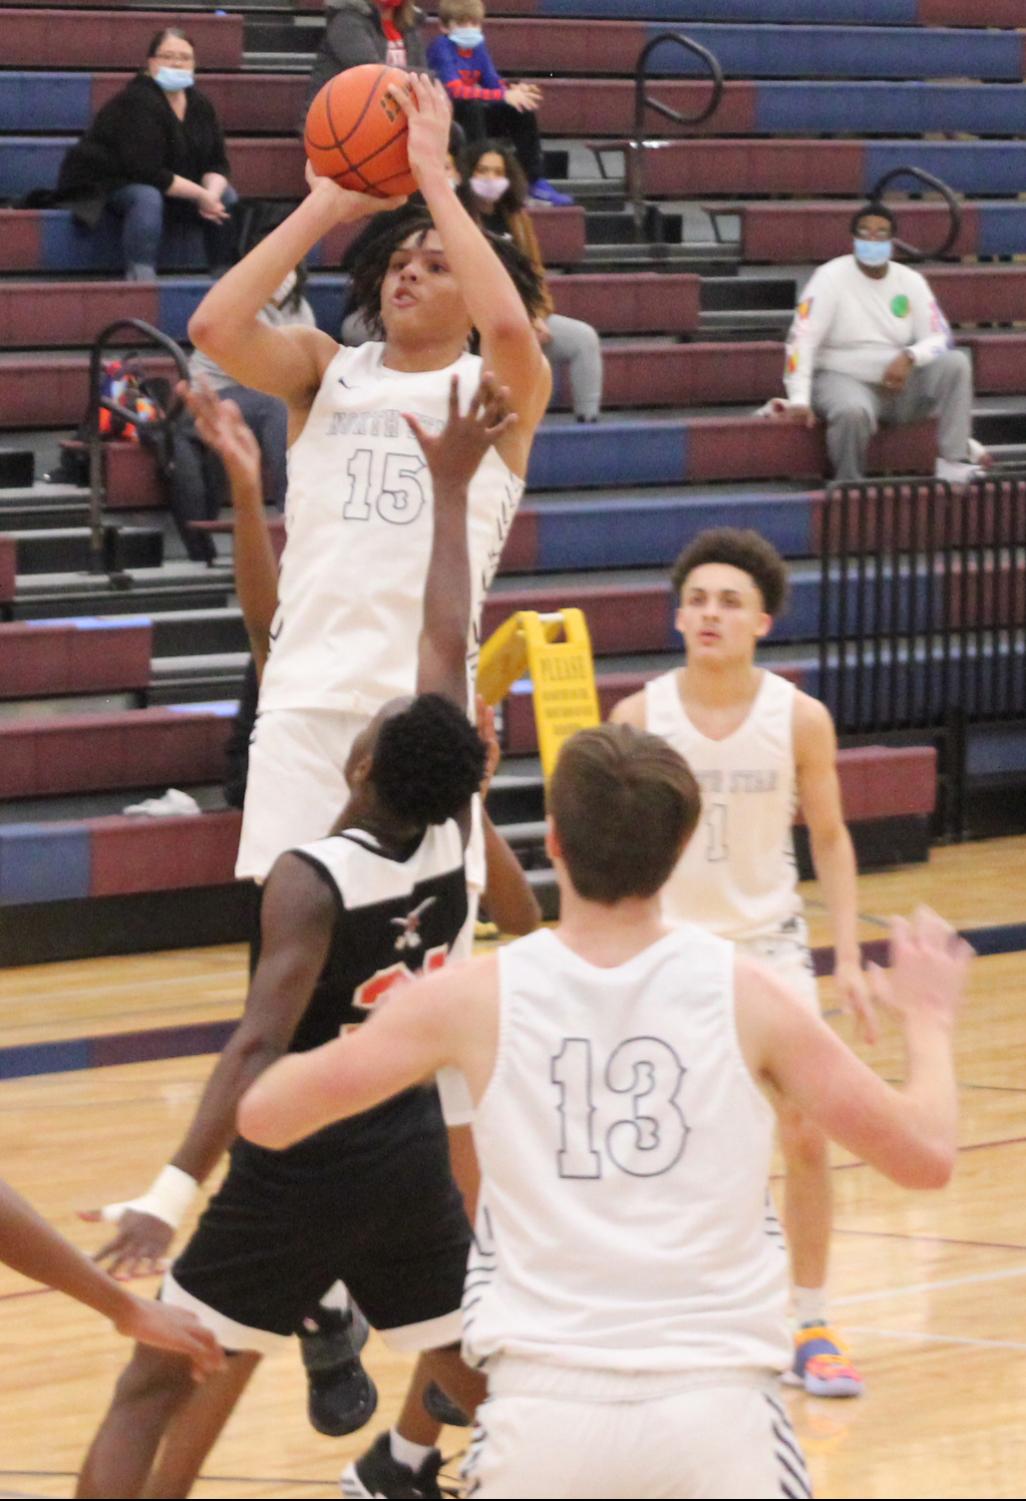 Sophomore Brennon Clemmons, Jr. goes up for a shot during the Gators game against Lincoln High.